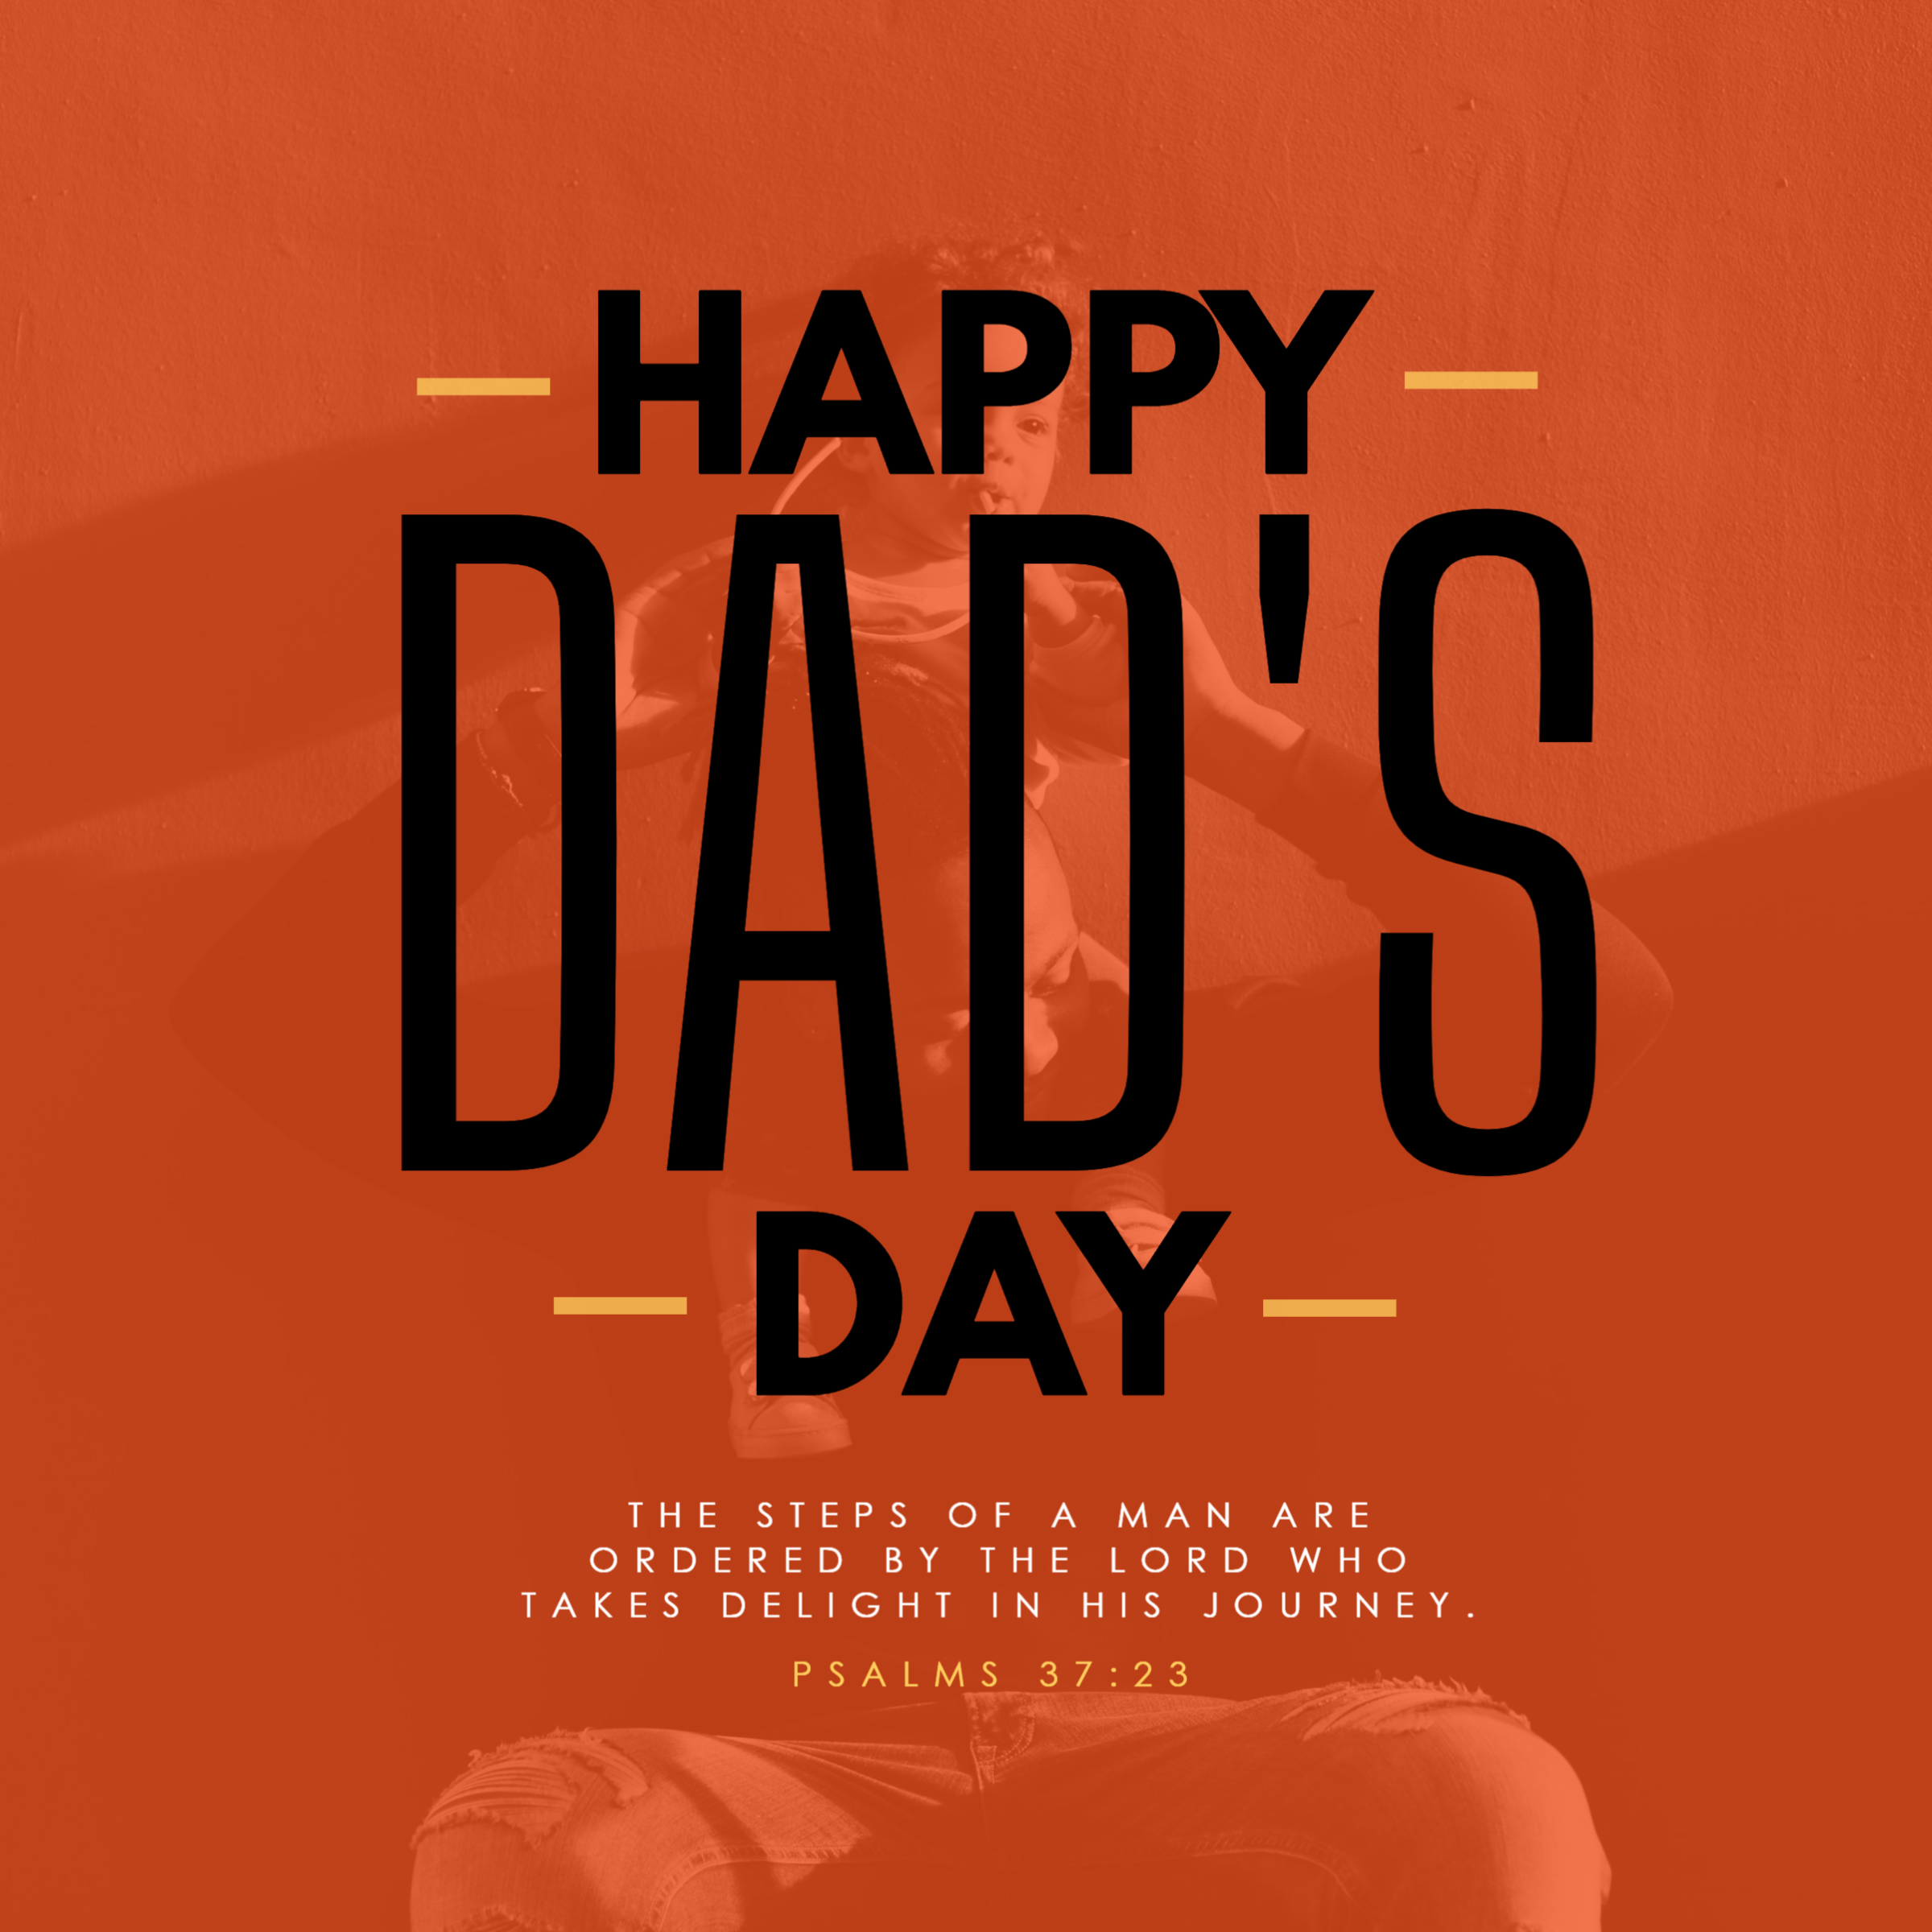 church father's day graphics